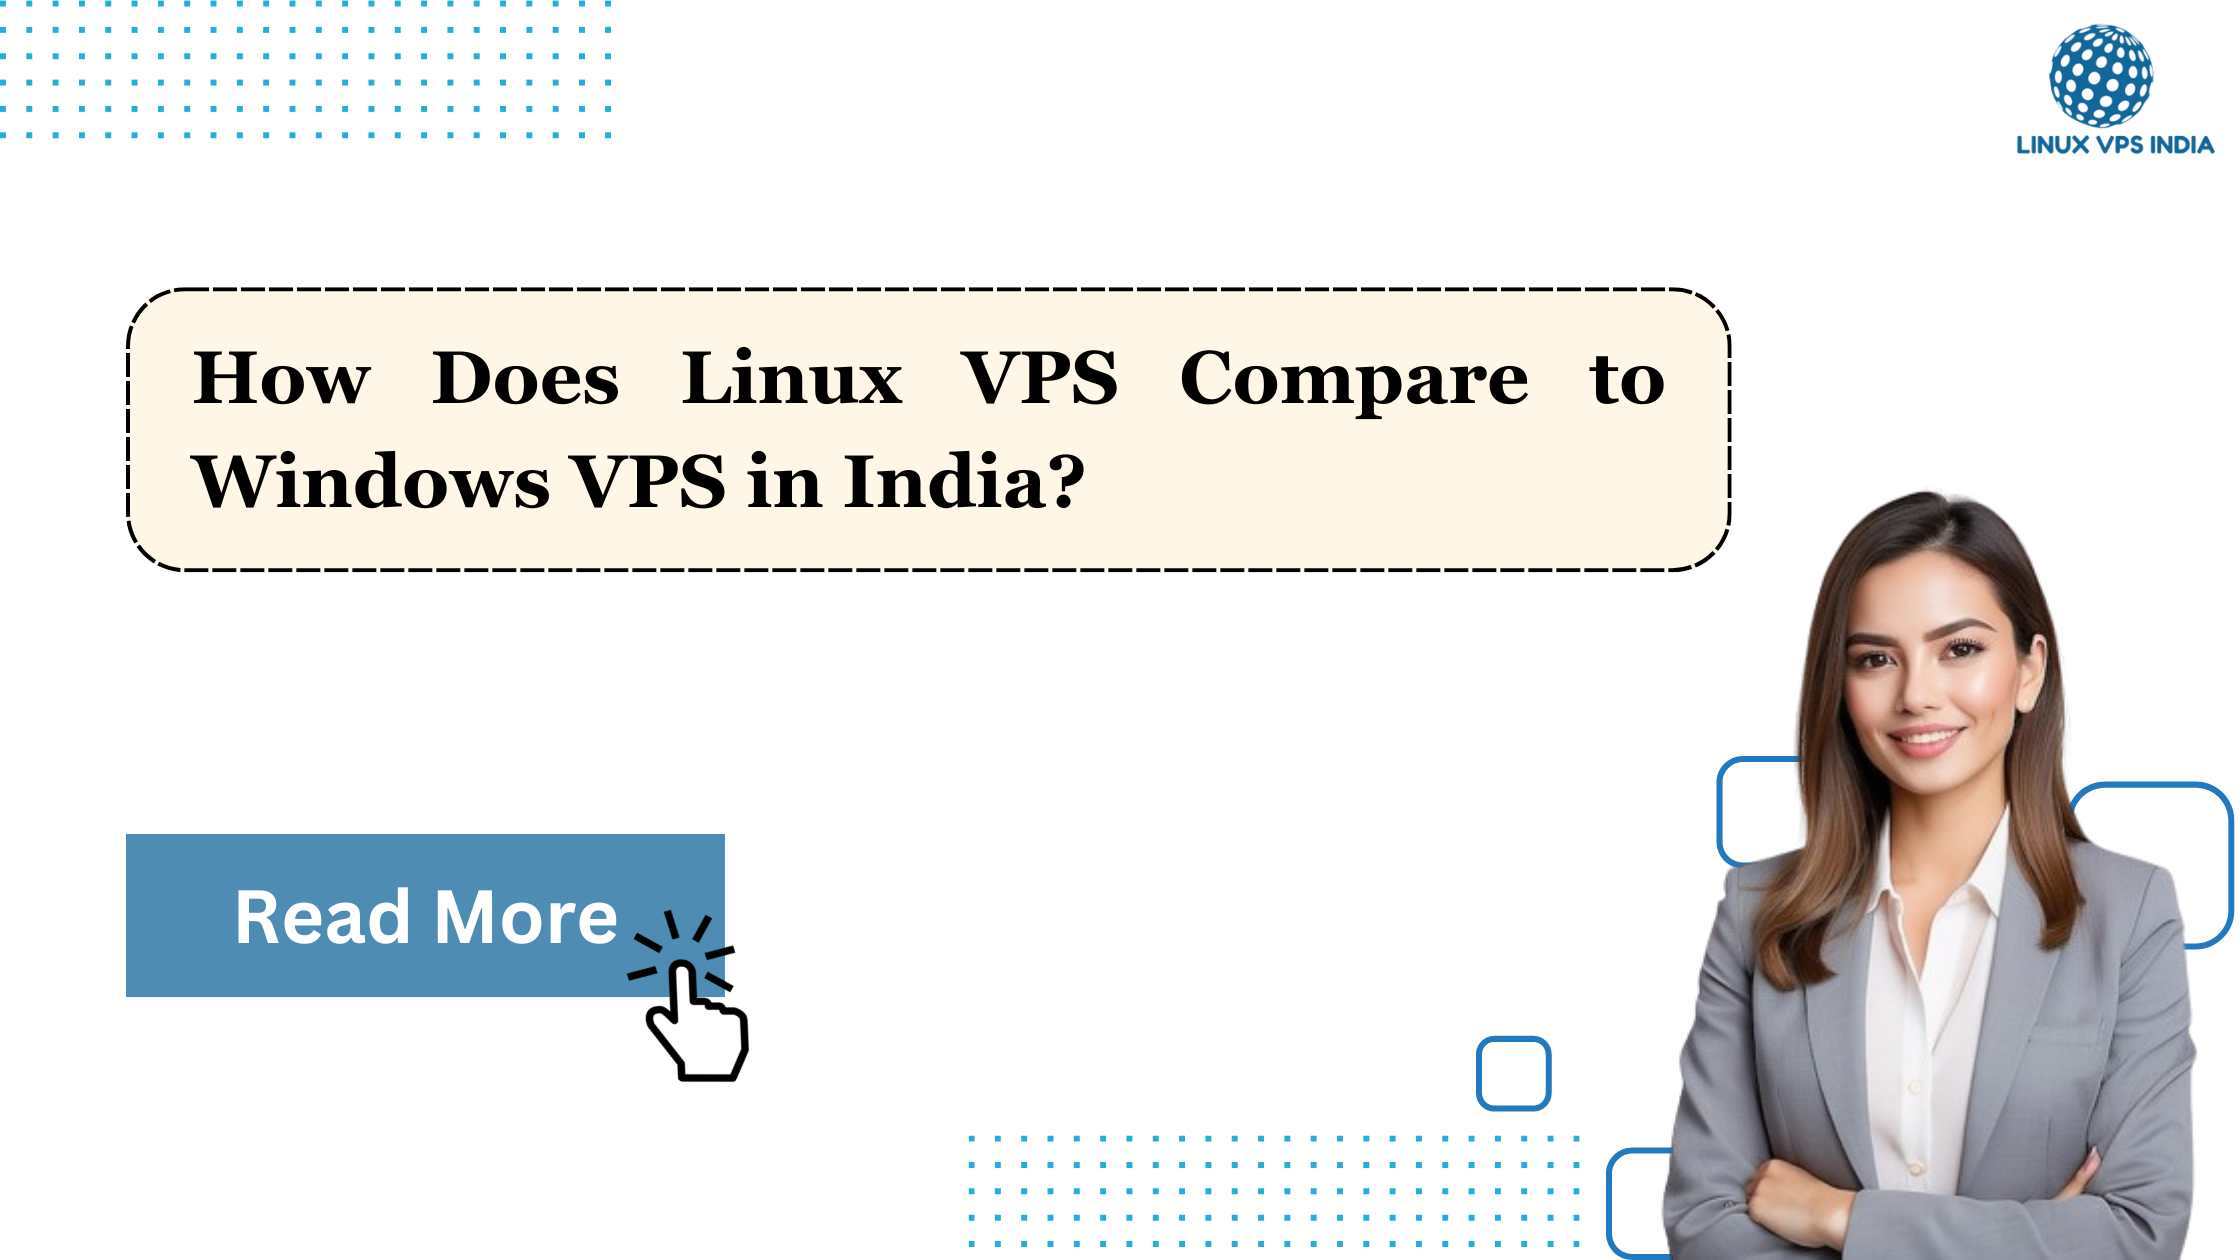 How Does Linux VPS Compare to Windows VPS in India?